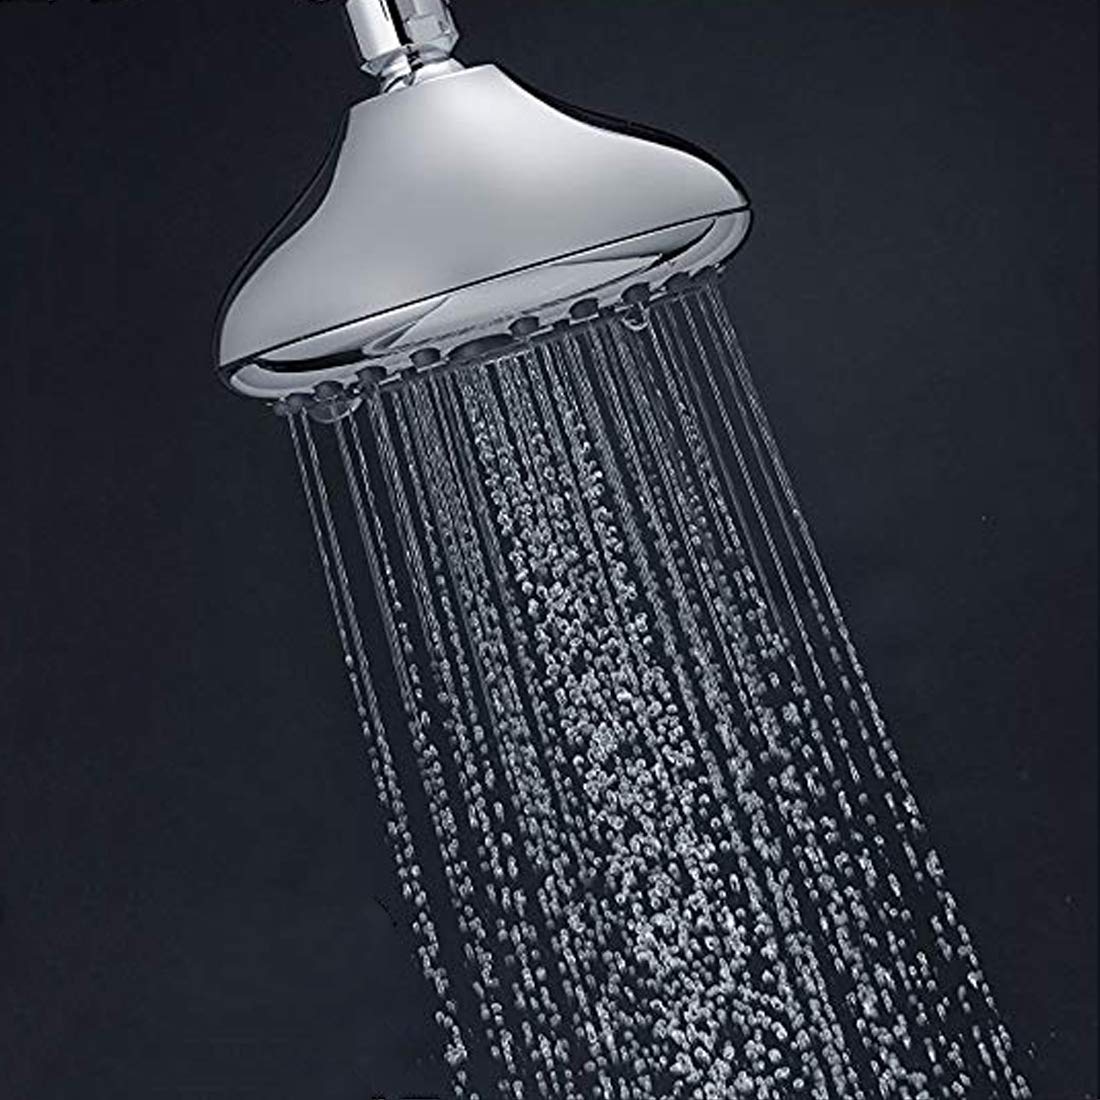 MS-5D135 Overhead shower with 6 function spray settings without arm